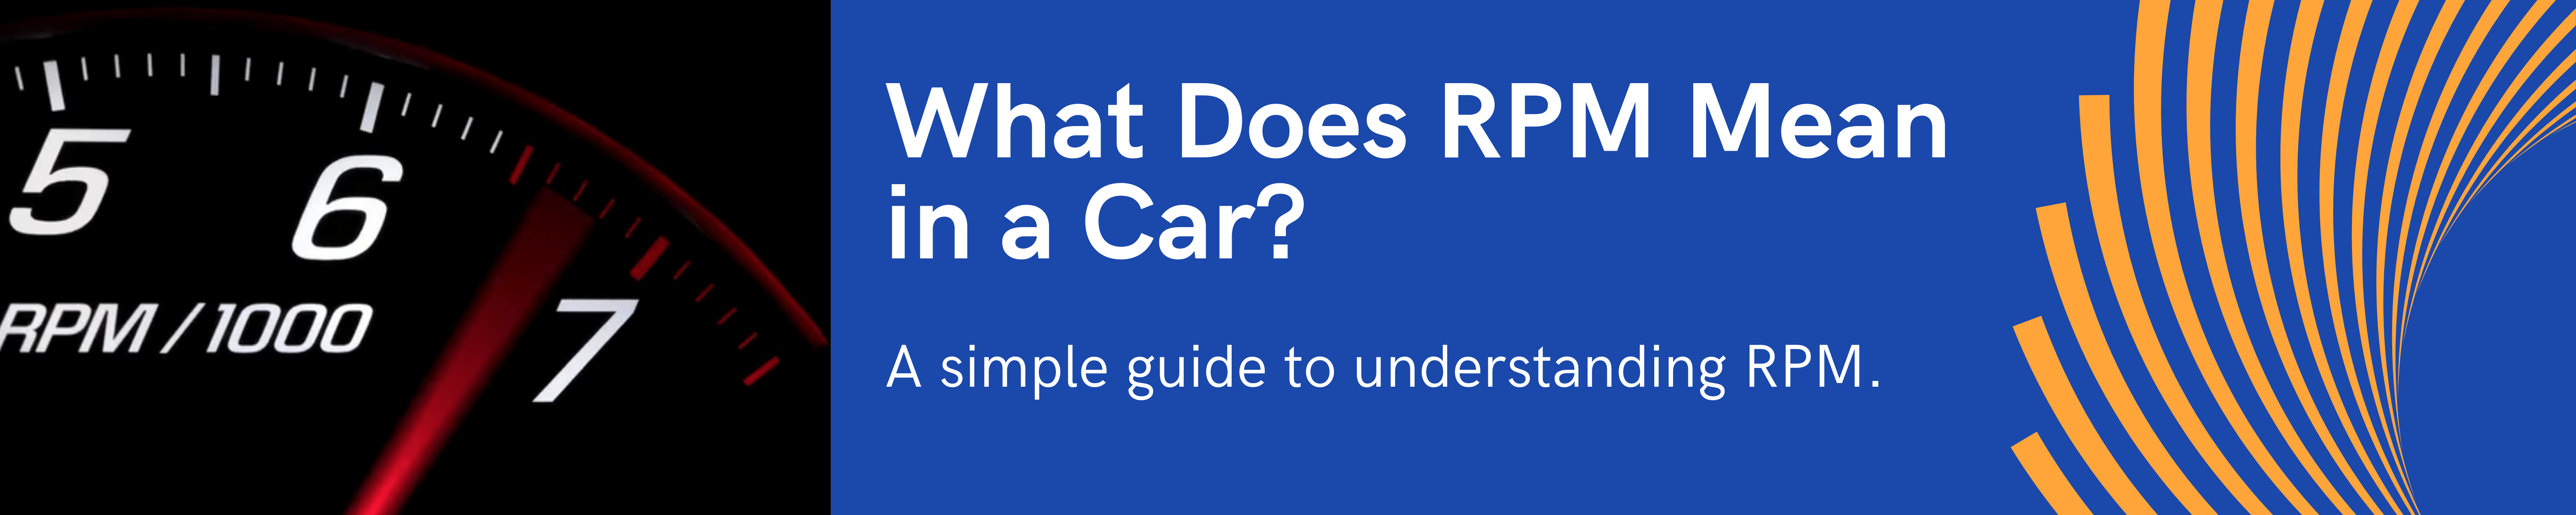 What does RPM mean in a car?